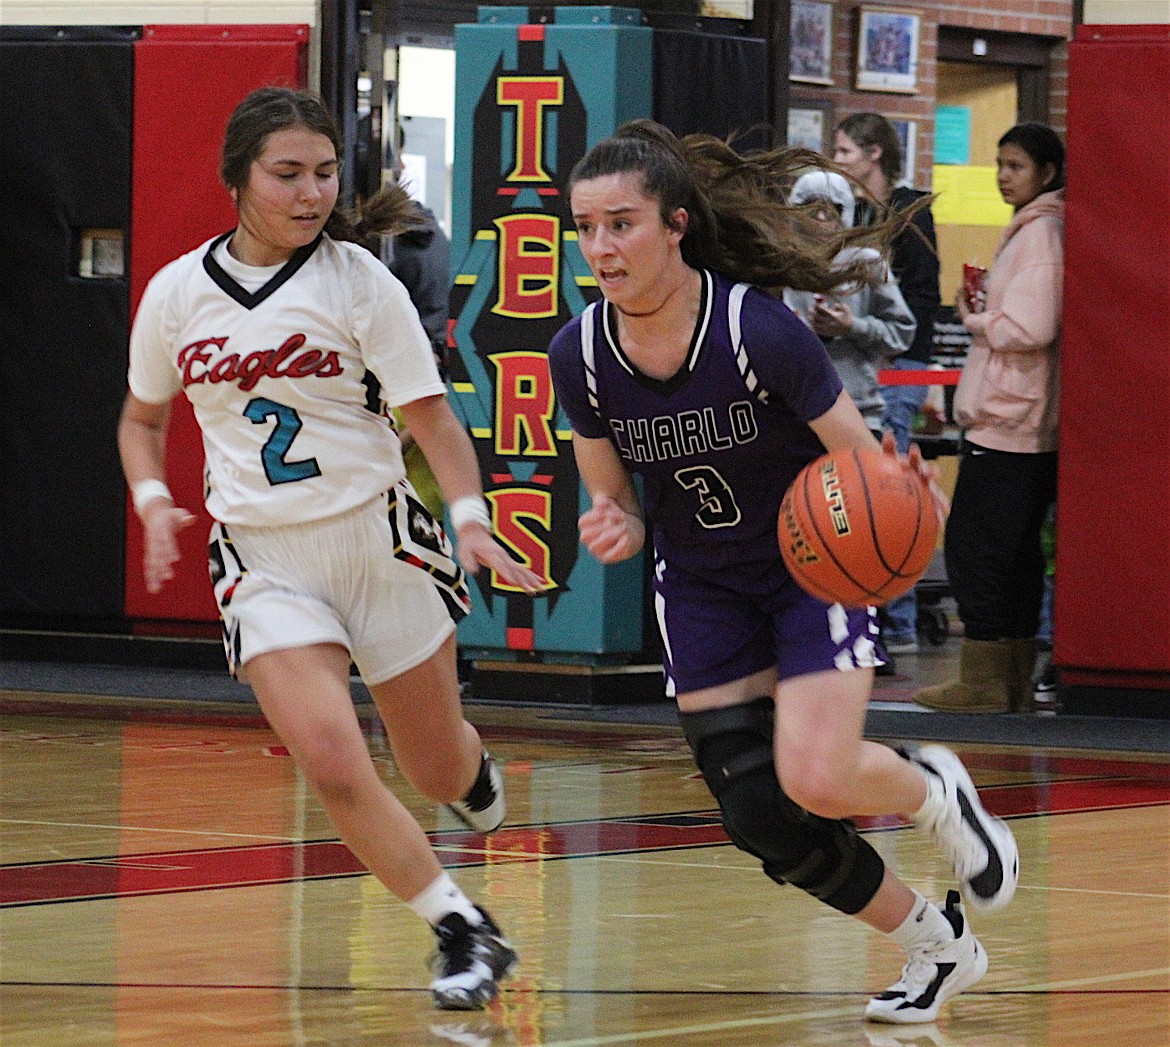 Charlo's Hayleigh Smith and Two Eagle River's Olivia Brueggeman head down the court in Thursday's game. (Ginger Zempel photo)